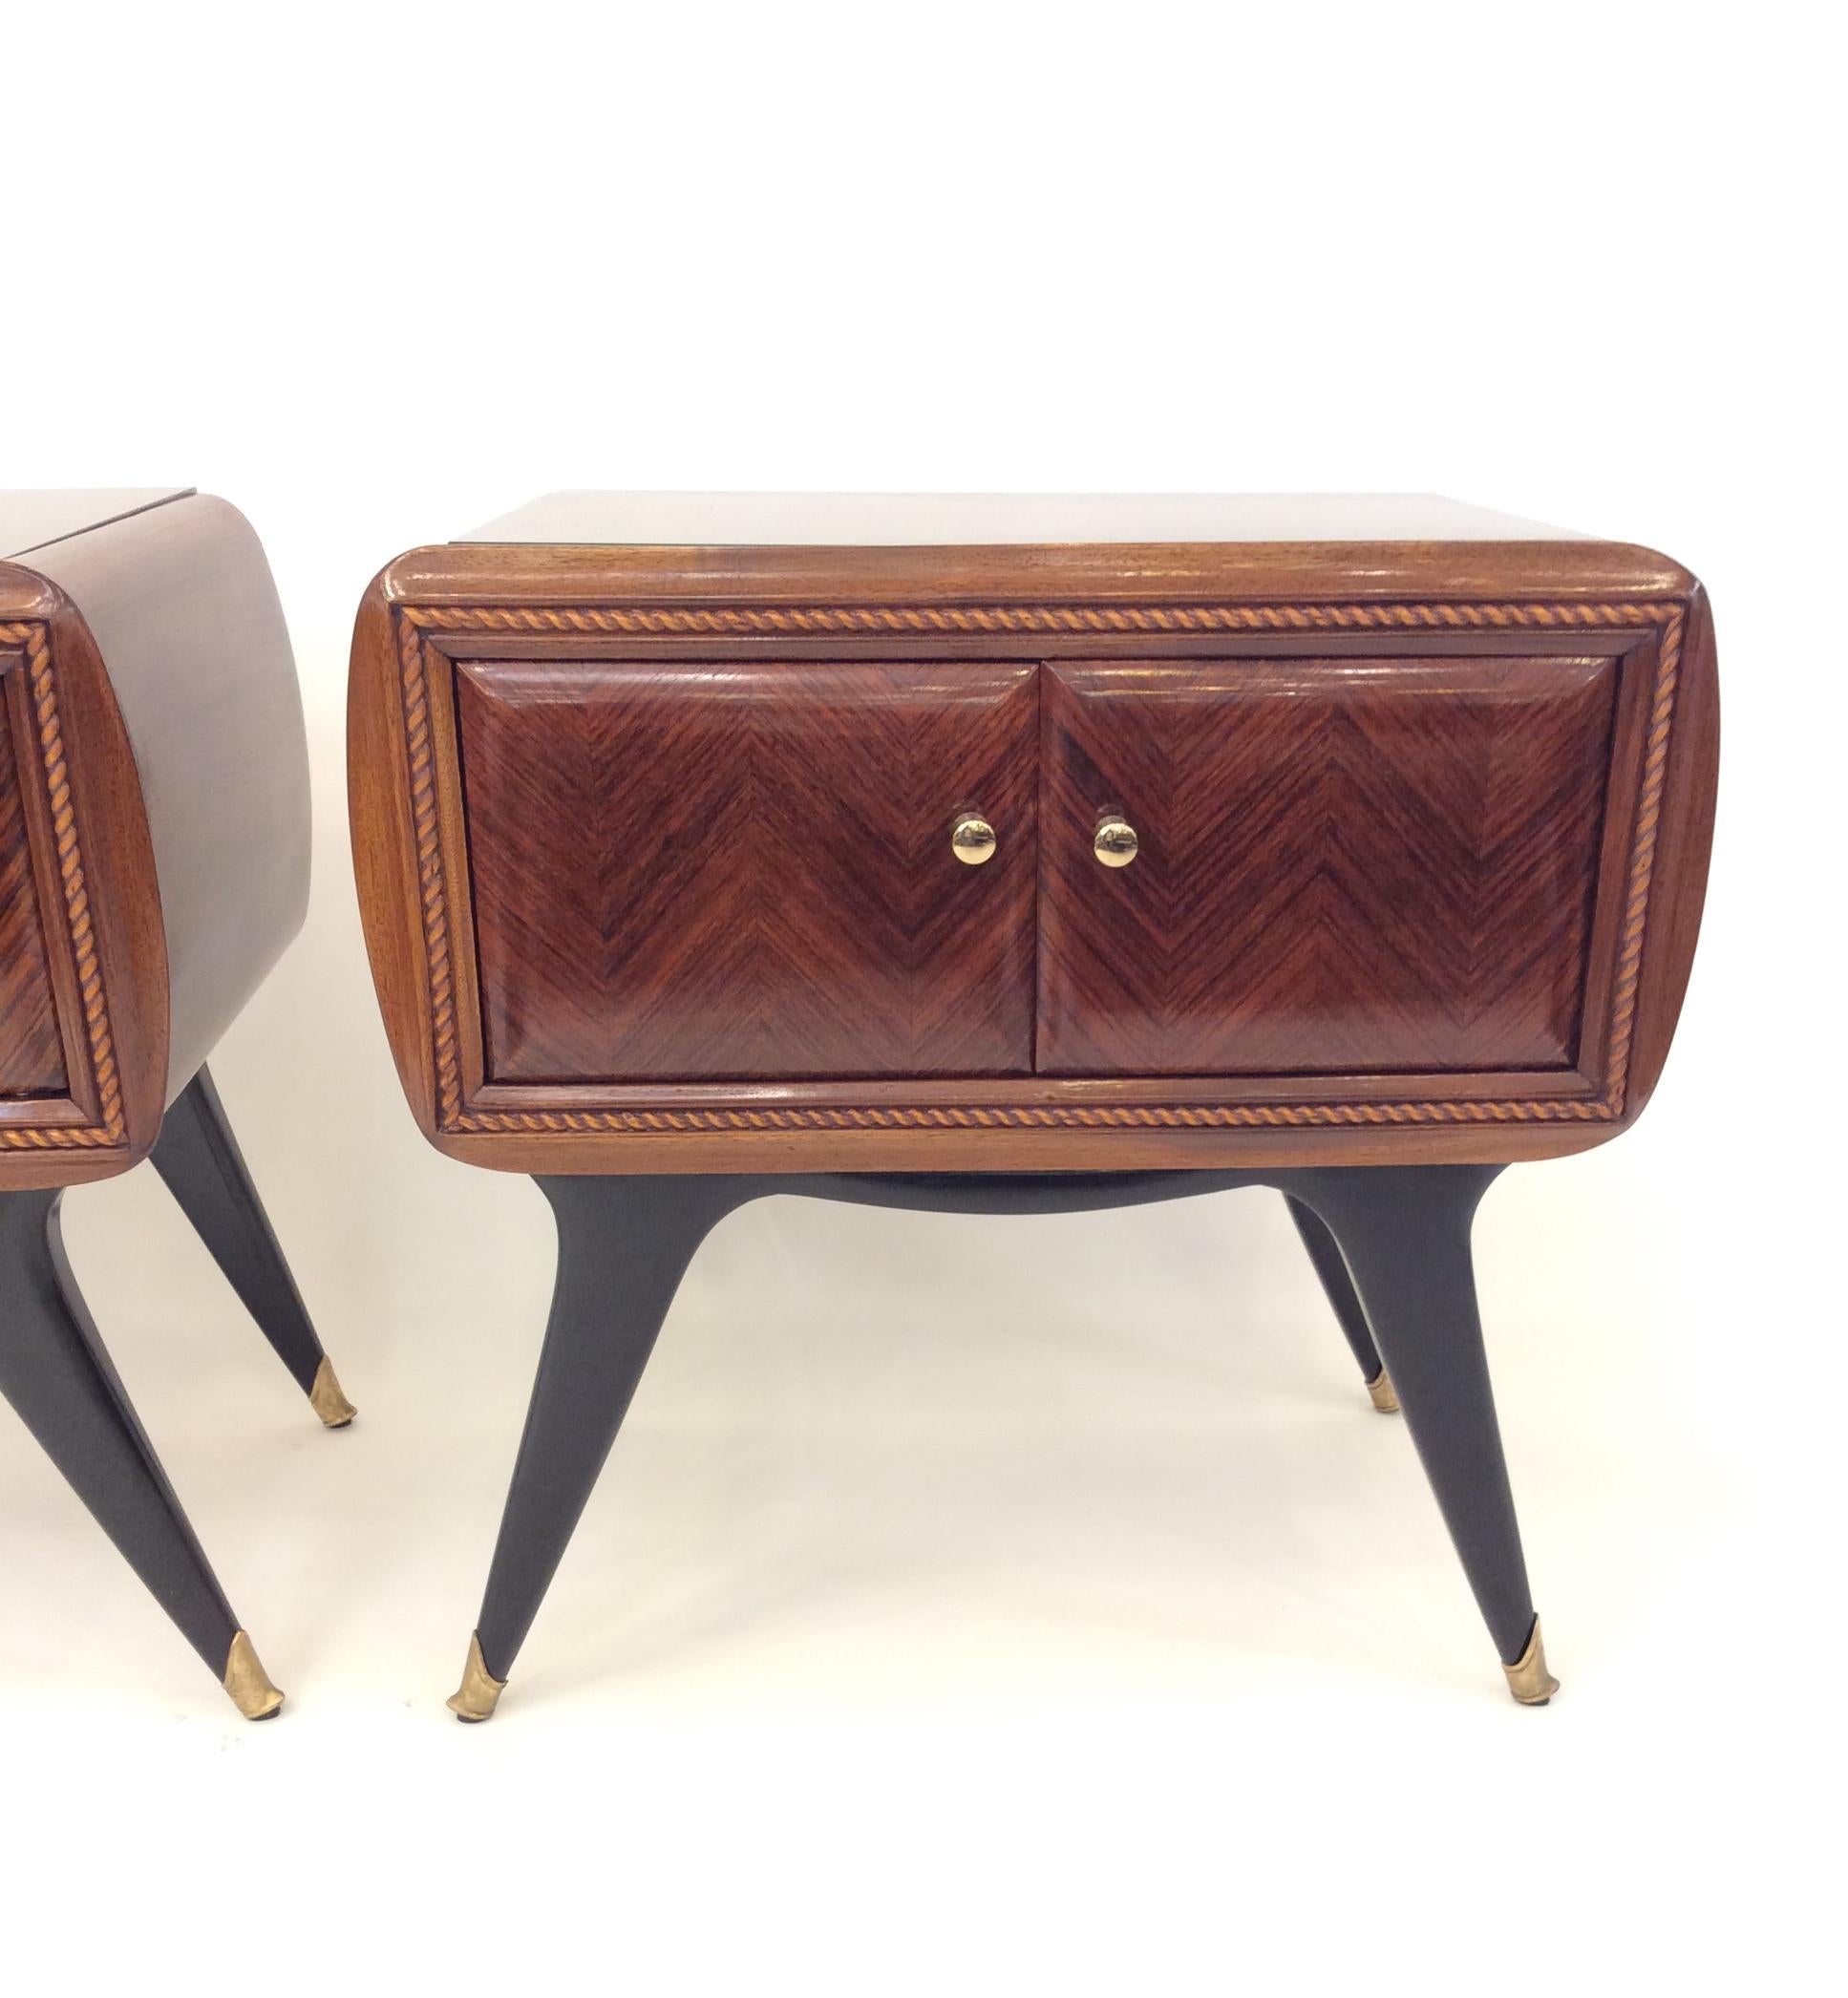 Pair of Italian Nightstands in the Style of Gio Ponti, circa 1950 For Sale 4